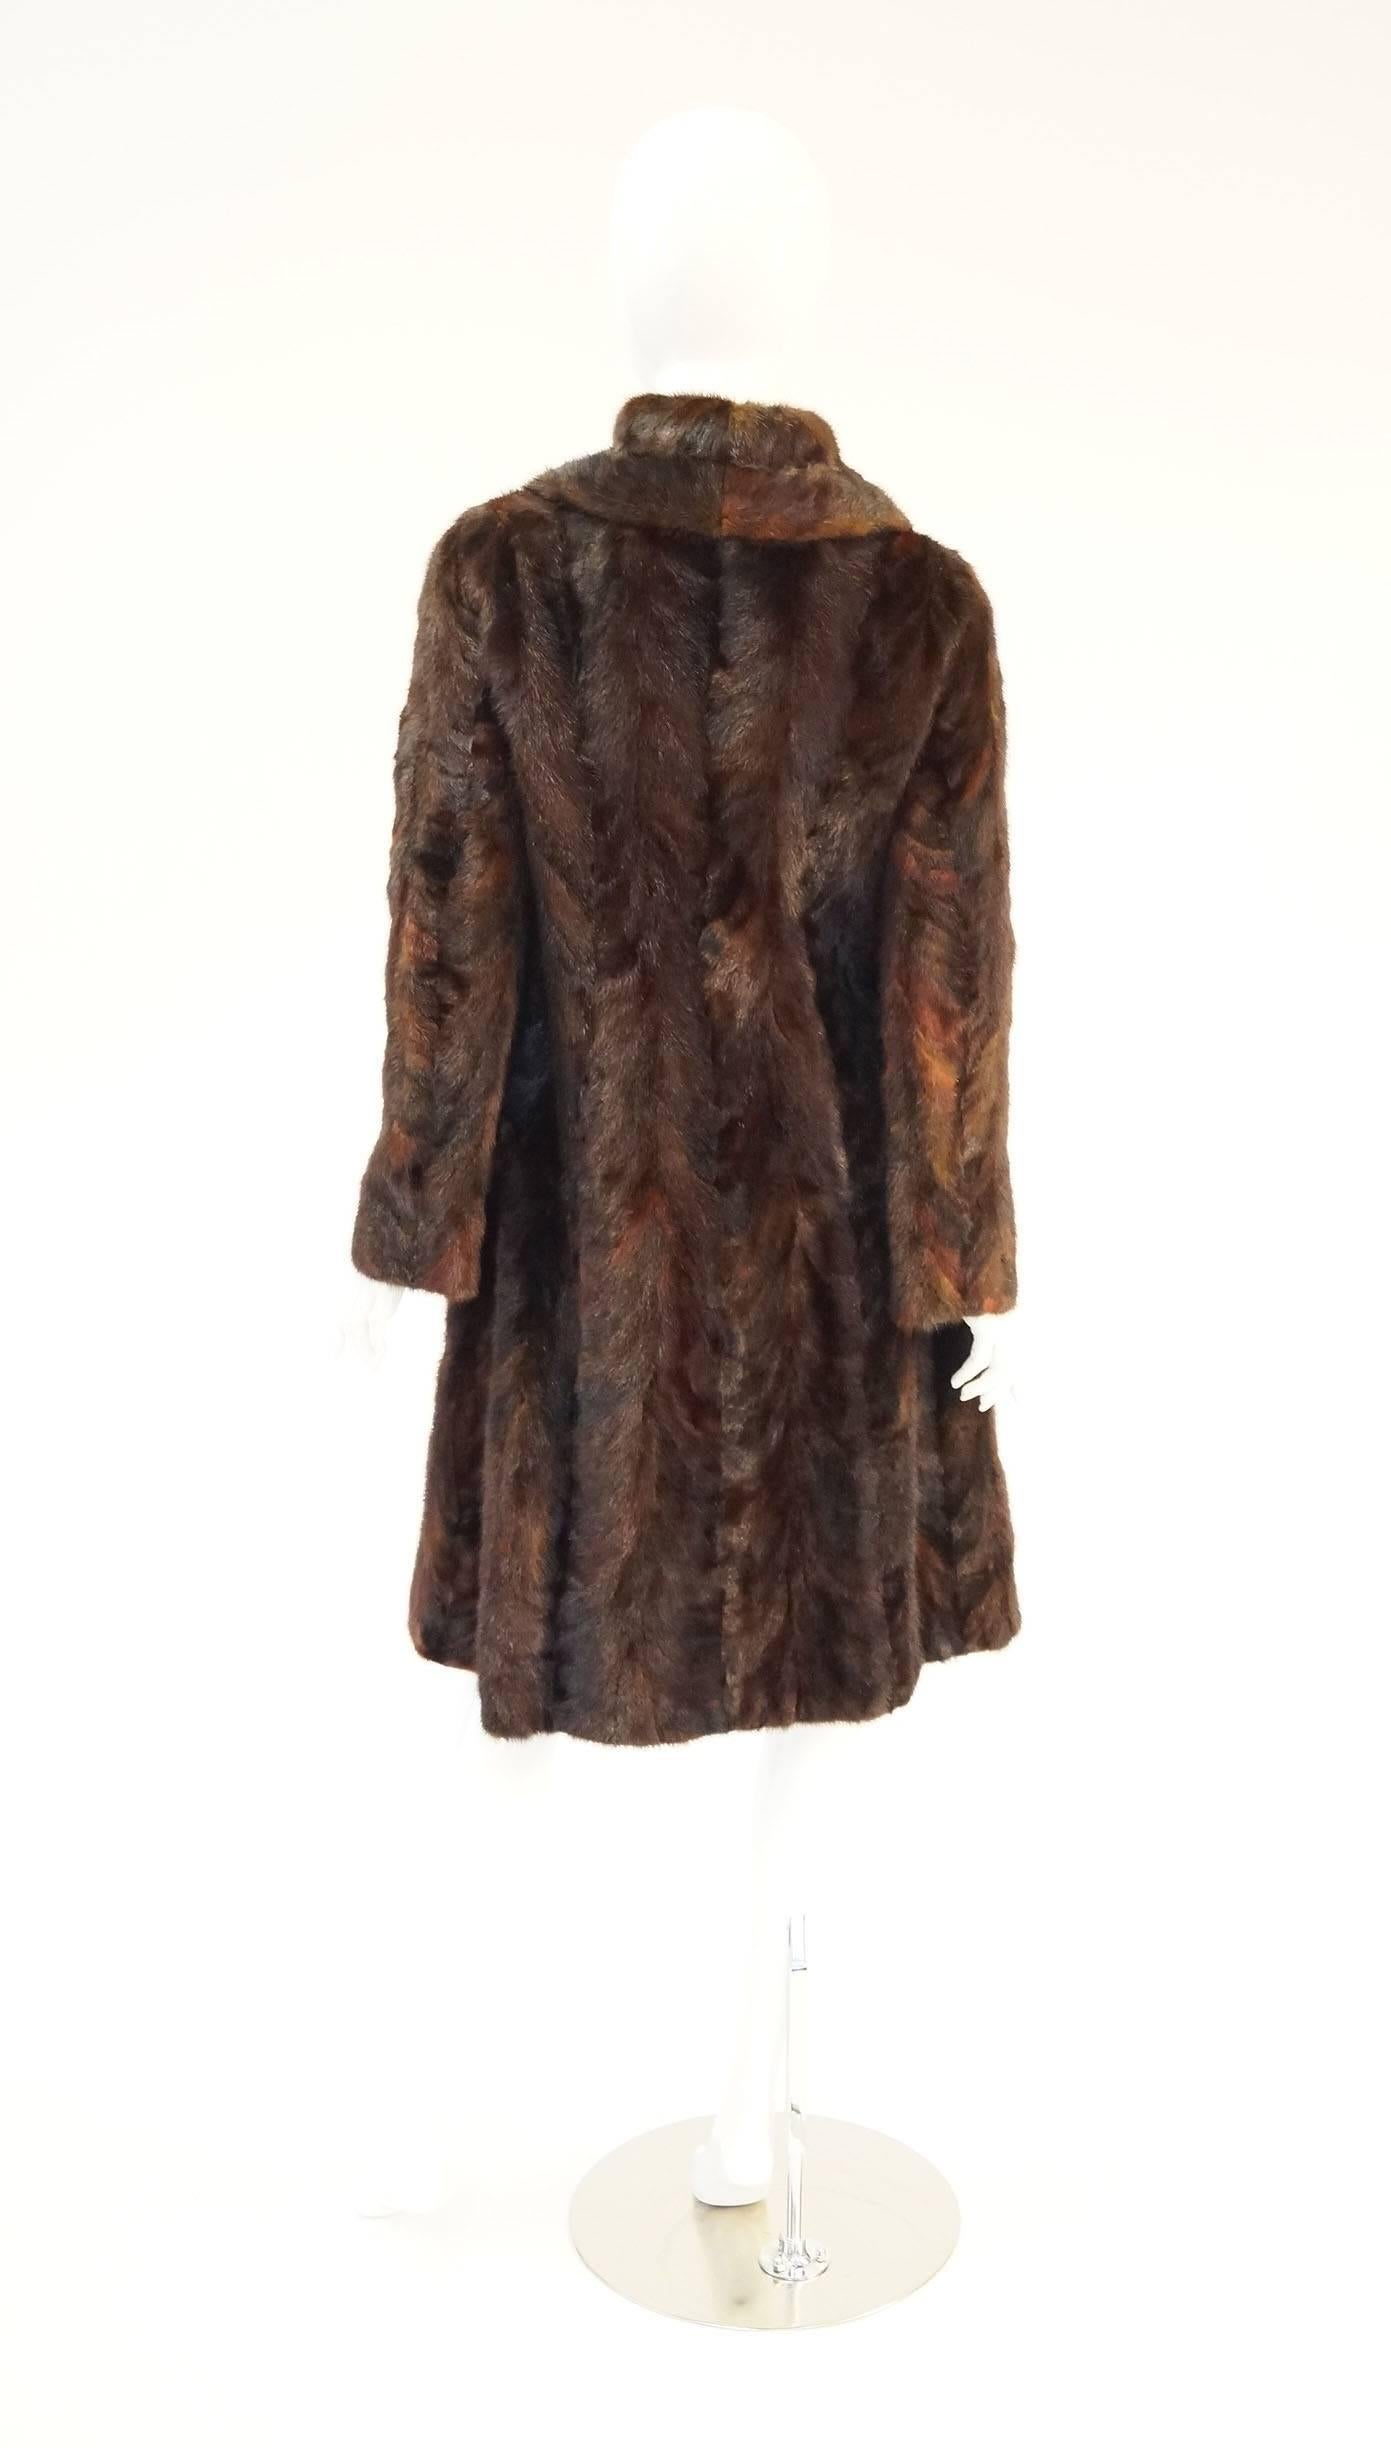 
This Vintage Oscar de la Renta sable coat for Montaldo's is absolutely elegant. The coat features an exaggerated peter pan collar and front placket. Long sleeves. Large pocket flaps. Knee length. The fur is a gorgeous mix of mottled browns, reds,